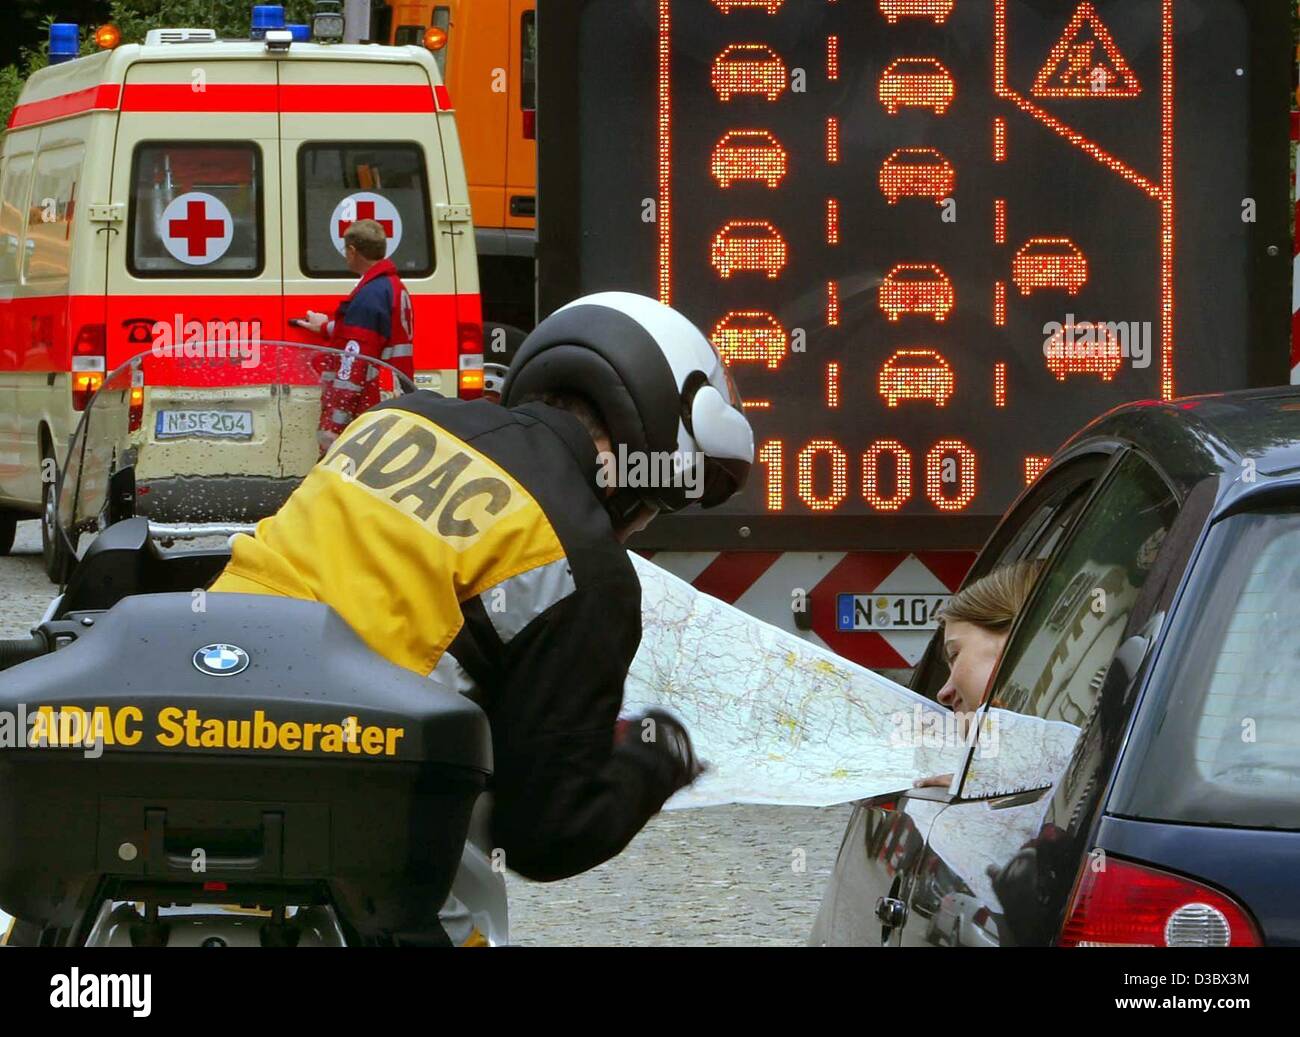 (dpa) - A traffic jam advisor of the German automobile club ADAC stops his motorbike next to a car in a traffic jam to advise a woman of alternative routes to avoid further traffic jams, photographed in a staged scene in Nuremberg, Germany, 4 July 2003. During the holiday season and the subsequent t Stock Photo